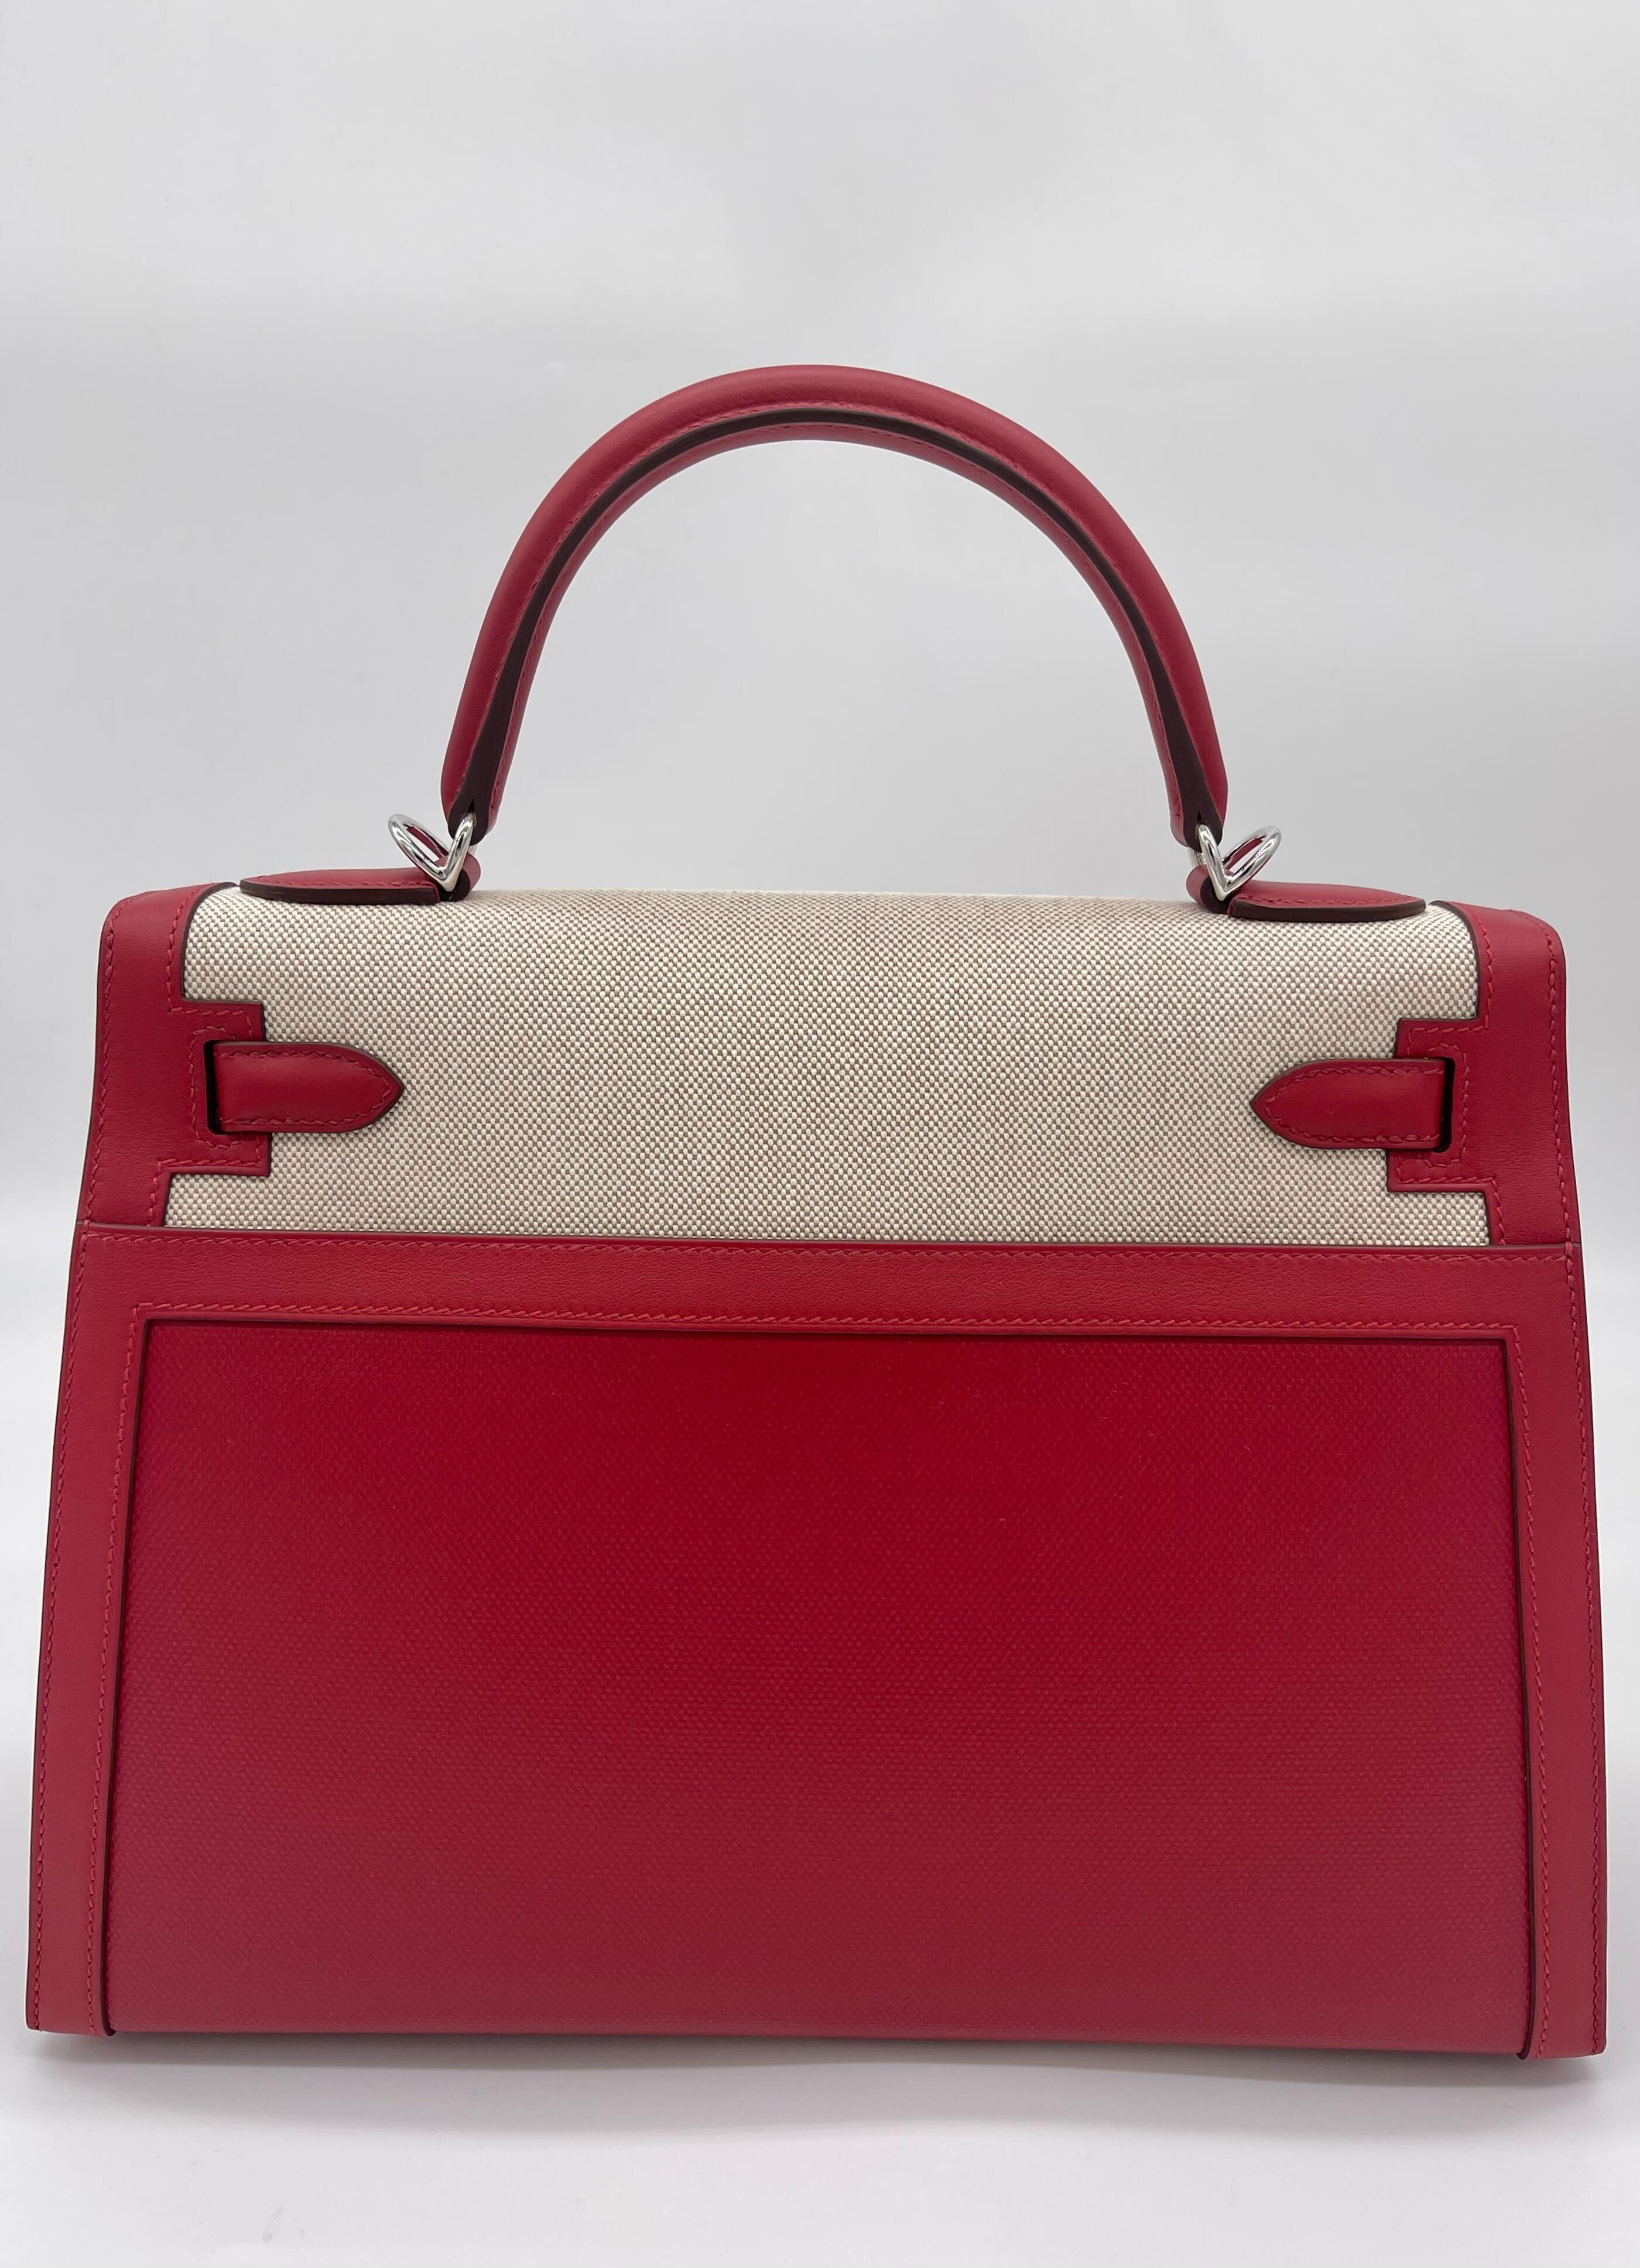 Women's or Men's Hermes Kelly 32 Sellier Rouge Piment Swift and Toile Berline Palladium Hardware For Sale